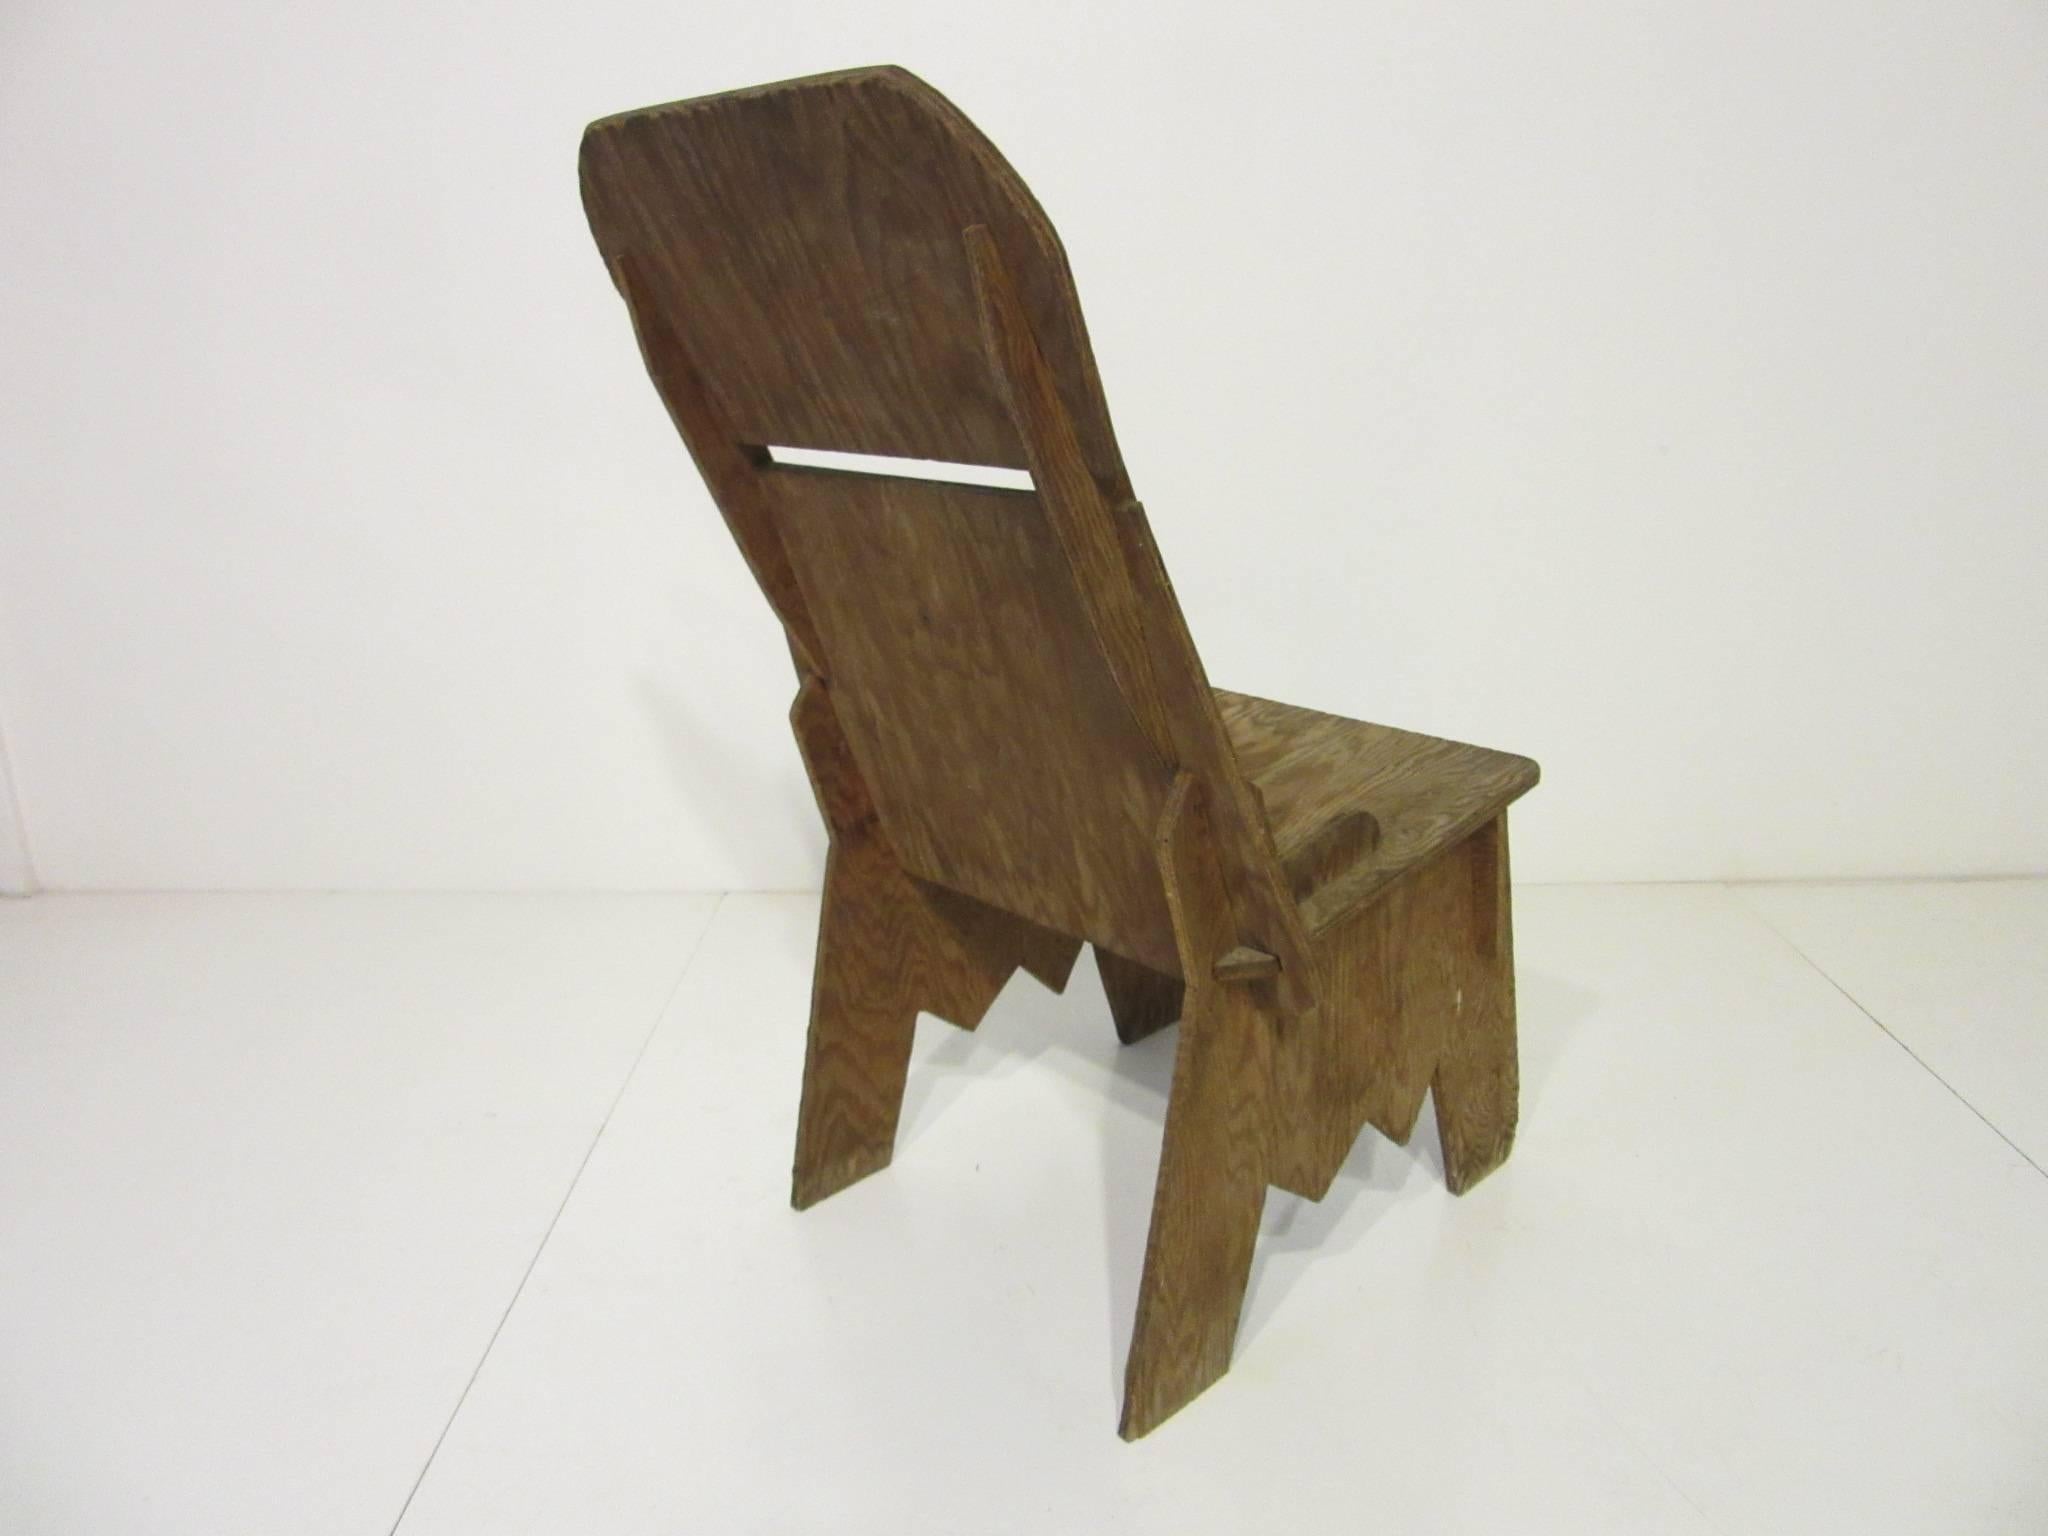 A very early birch plywood designed chair made with interlocking pieces, in the manner of innovators like Frank Lloyd Wright and Grabe using plywood as a furniture product. The chair is still usable and amazingly comfortable to sit in artist and